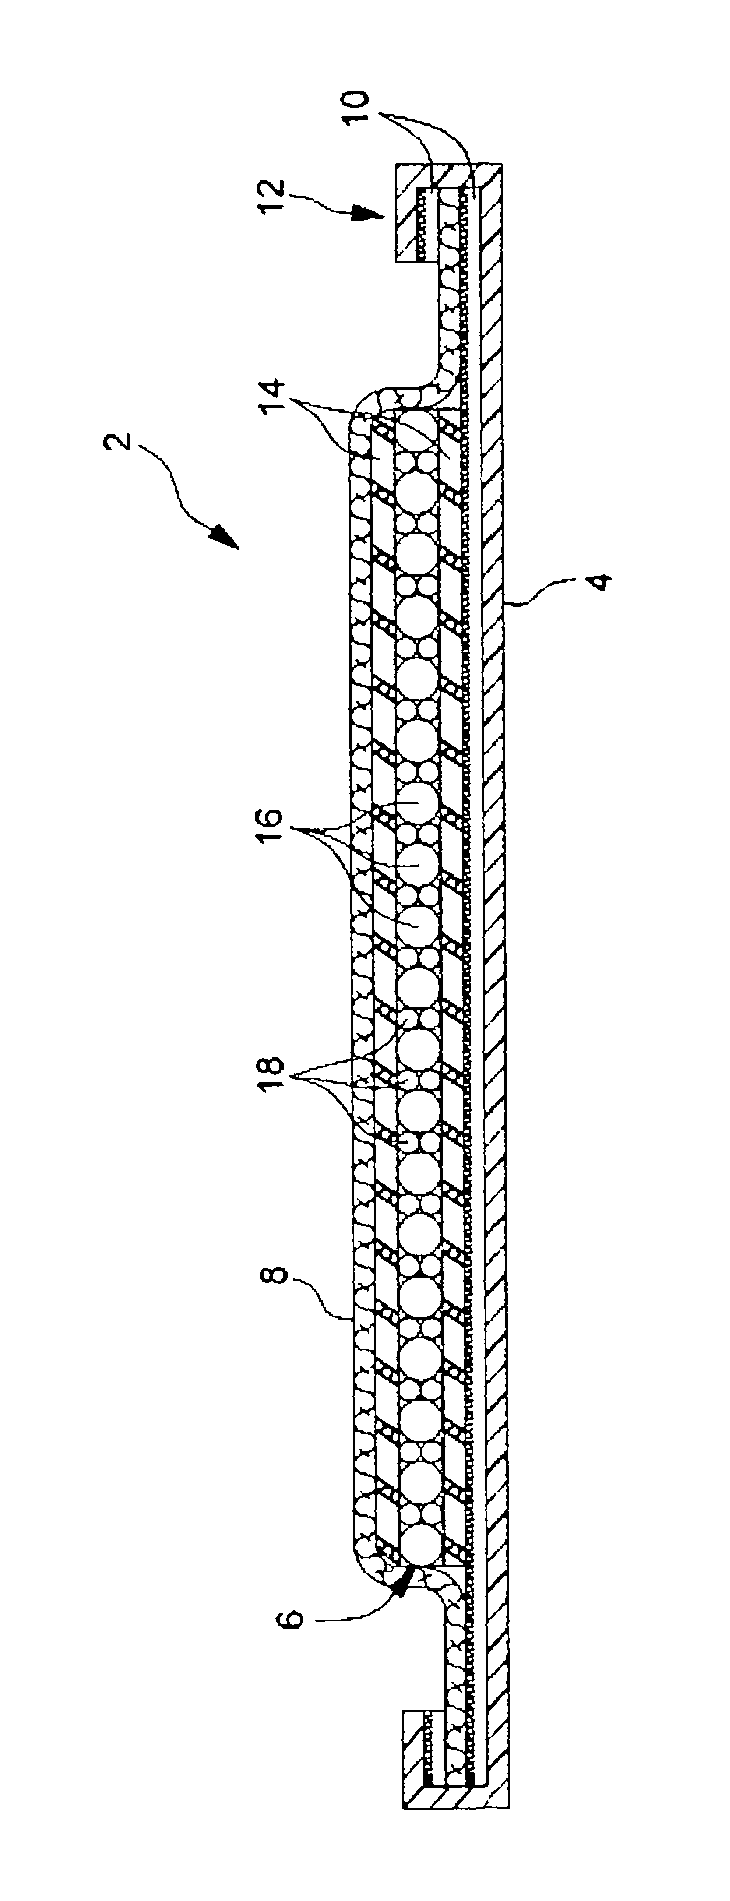 Animal incontinence device